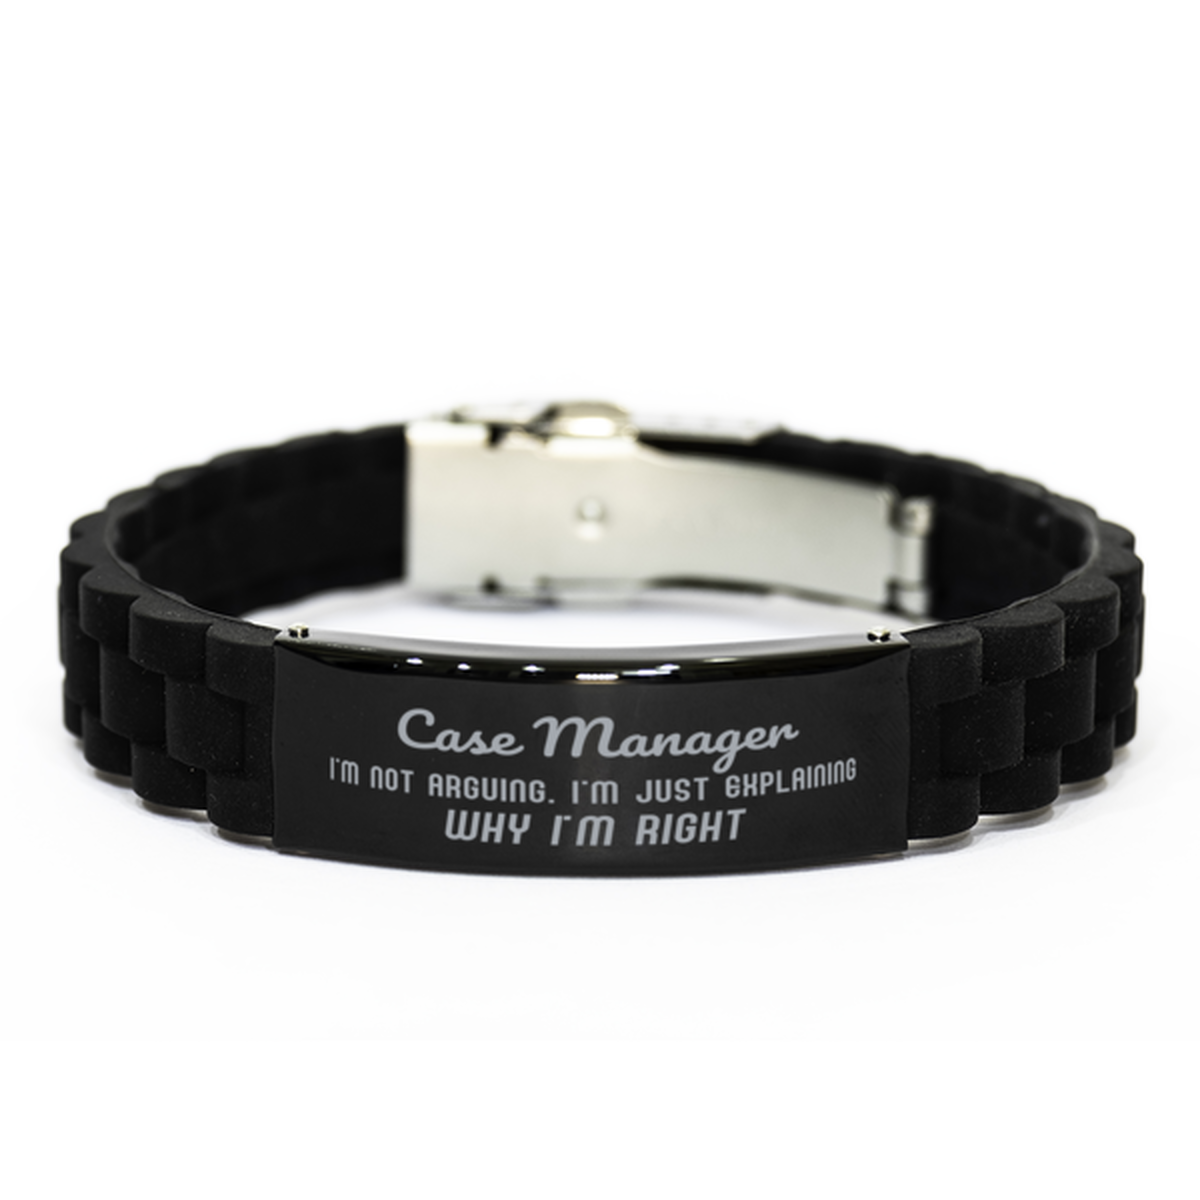 Case Manager I'm not Arguing. I'm Just Explaining Why I'm RIGHT Black Glidelock Clasp Bracelet, Funny Saying Quote Case Manager Gifts For Case Manager Graduation Birthday Christmas Gifts for Men Women Coworker